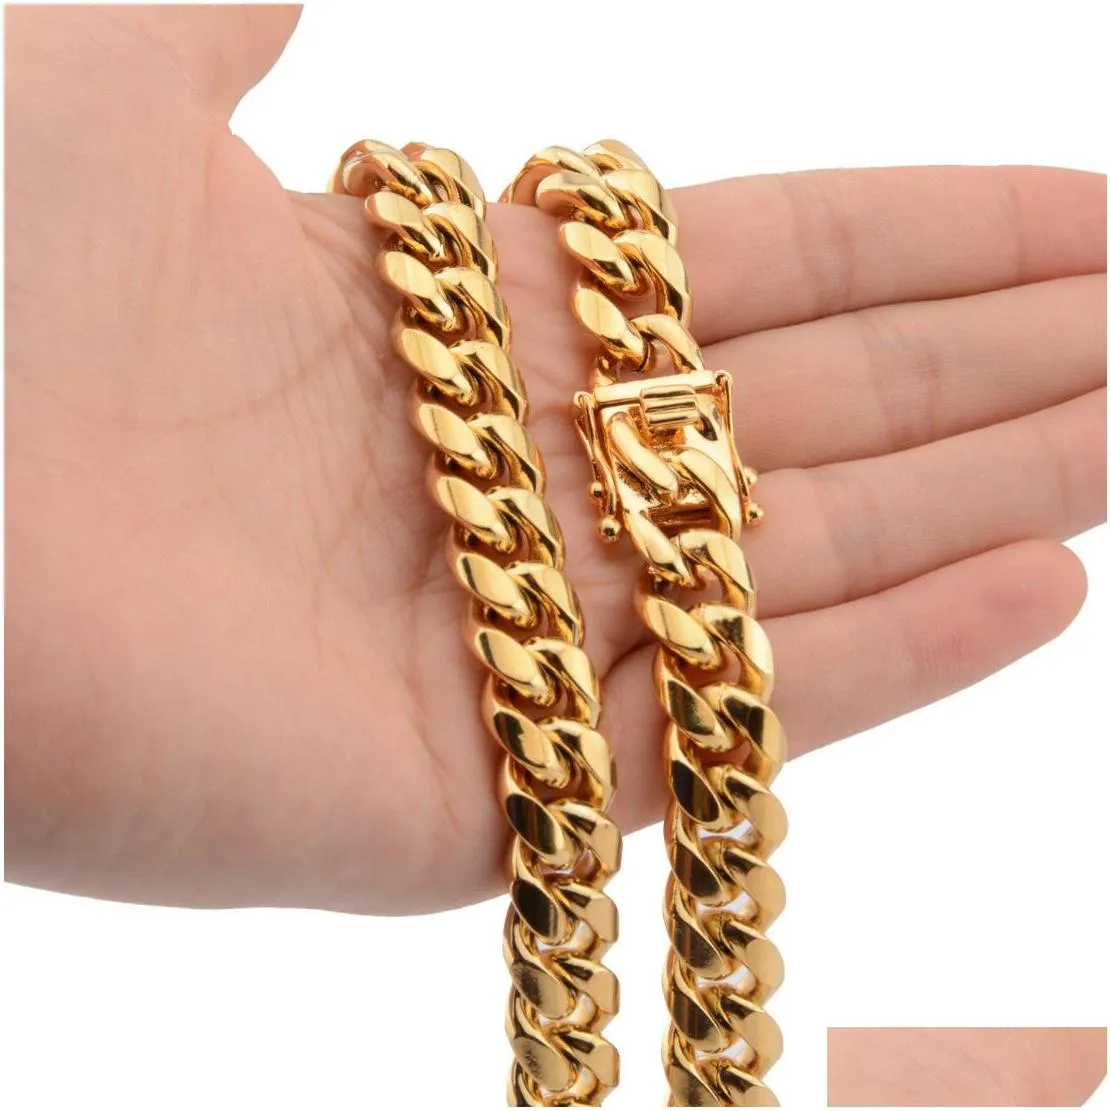 8 10 12 14 16 18mm 1830inches  cuban link gold chain hip hop jewelry thick stainless steel necklace277p6868481